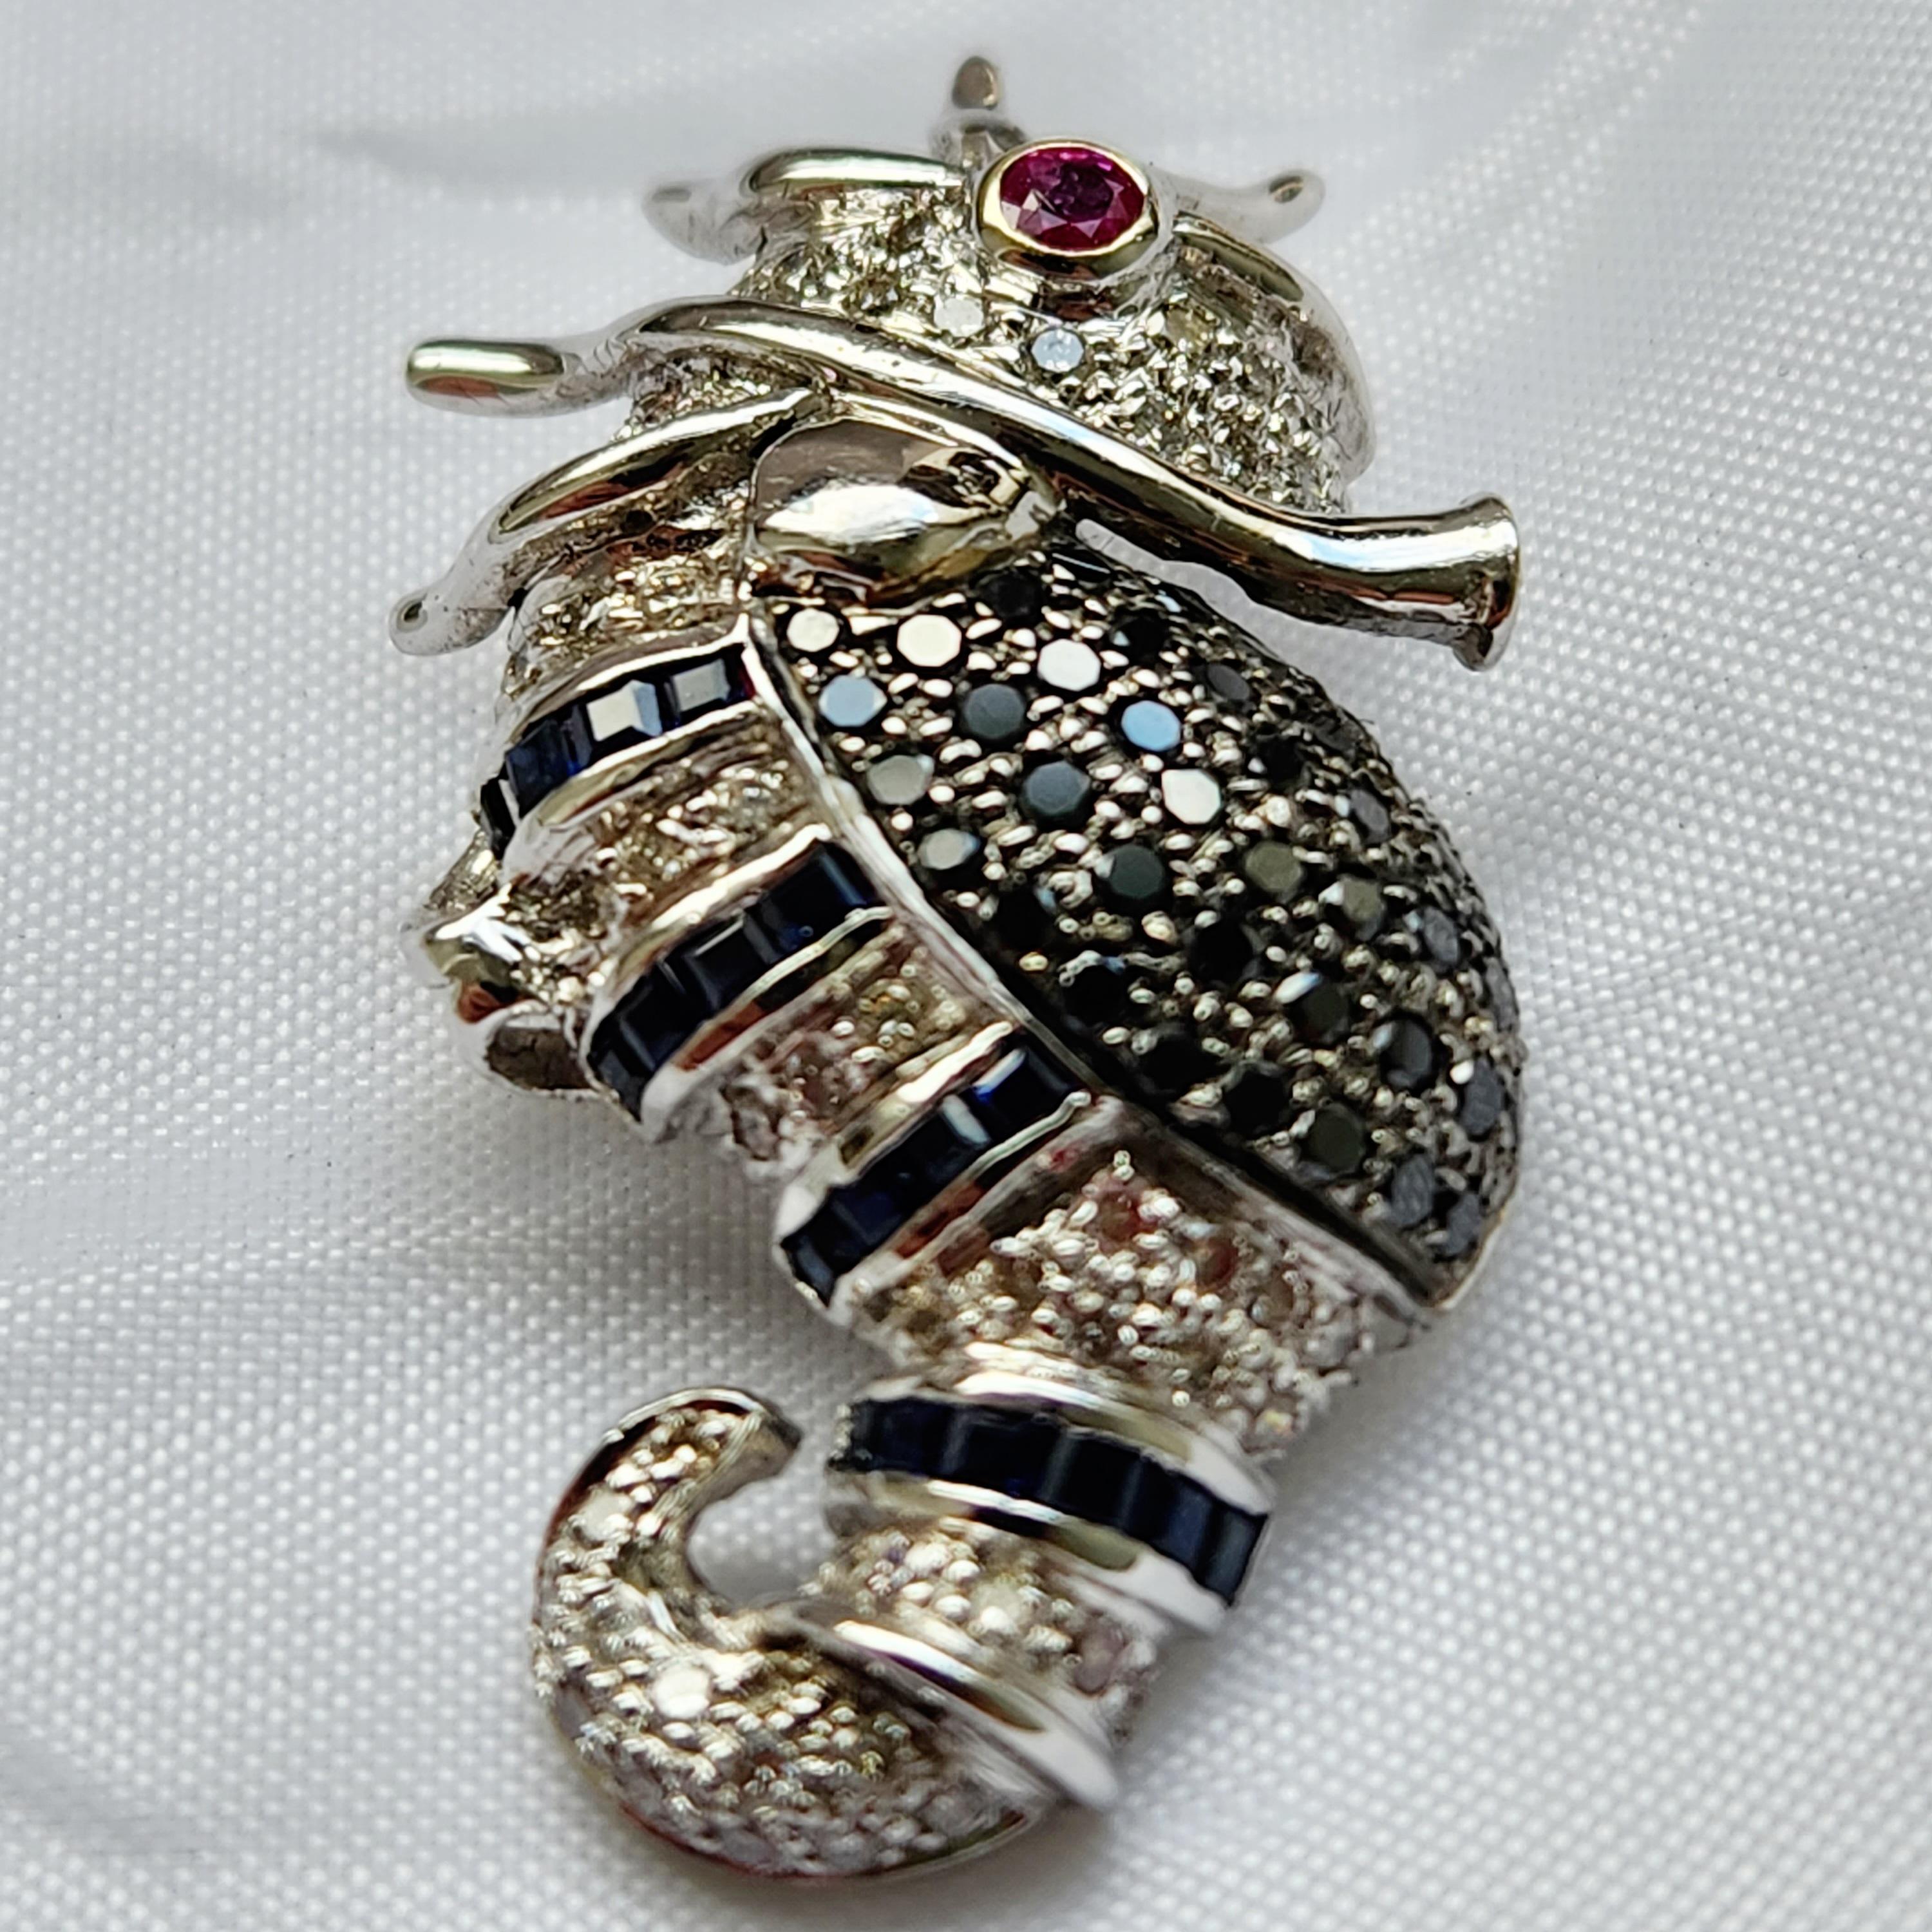 A gorgeous piece of jewelry, sea horse shaped brooch is certain to draw admiration. The centerpiece eye is an exquisitely faceted red ruby set in 18k white gold which is surrounded with full of glittering 0.92 cts of black and white melee diamonds.